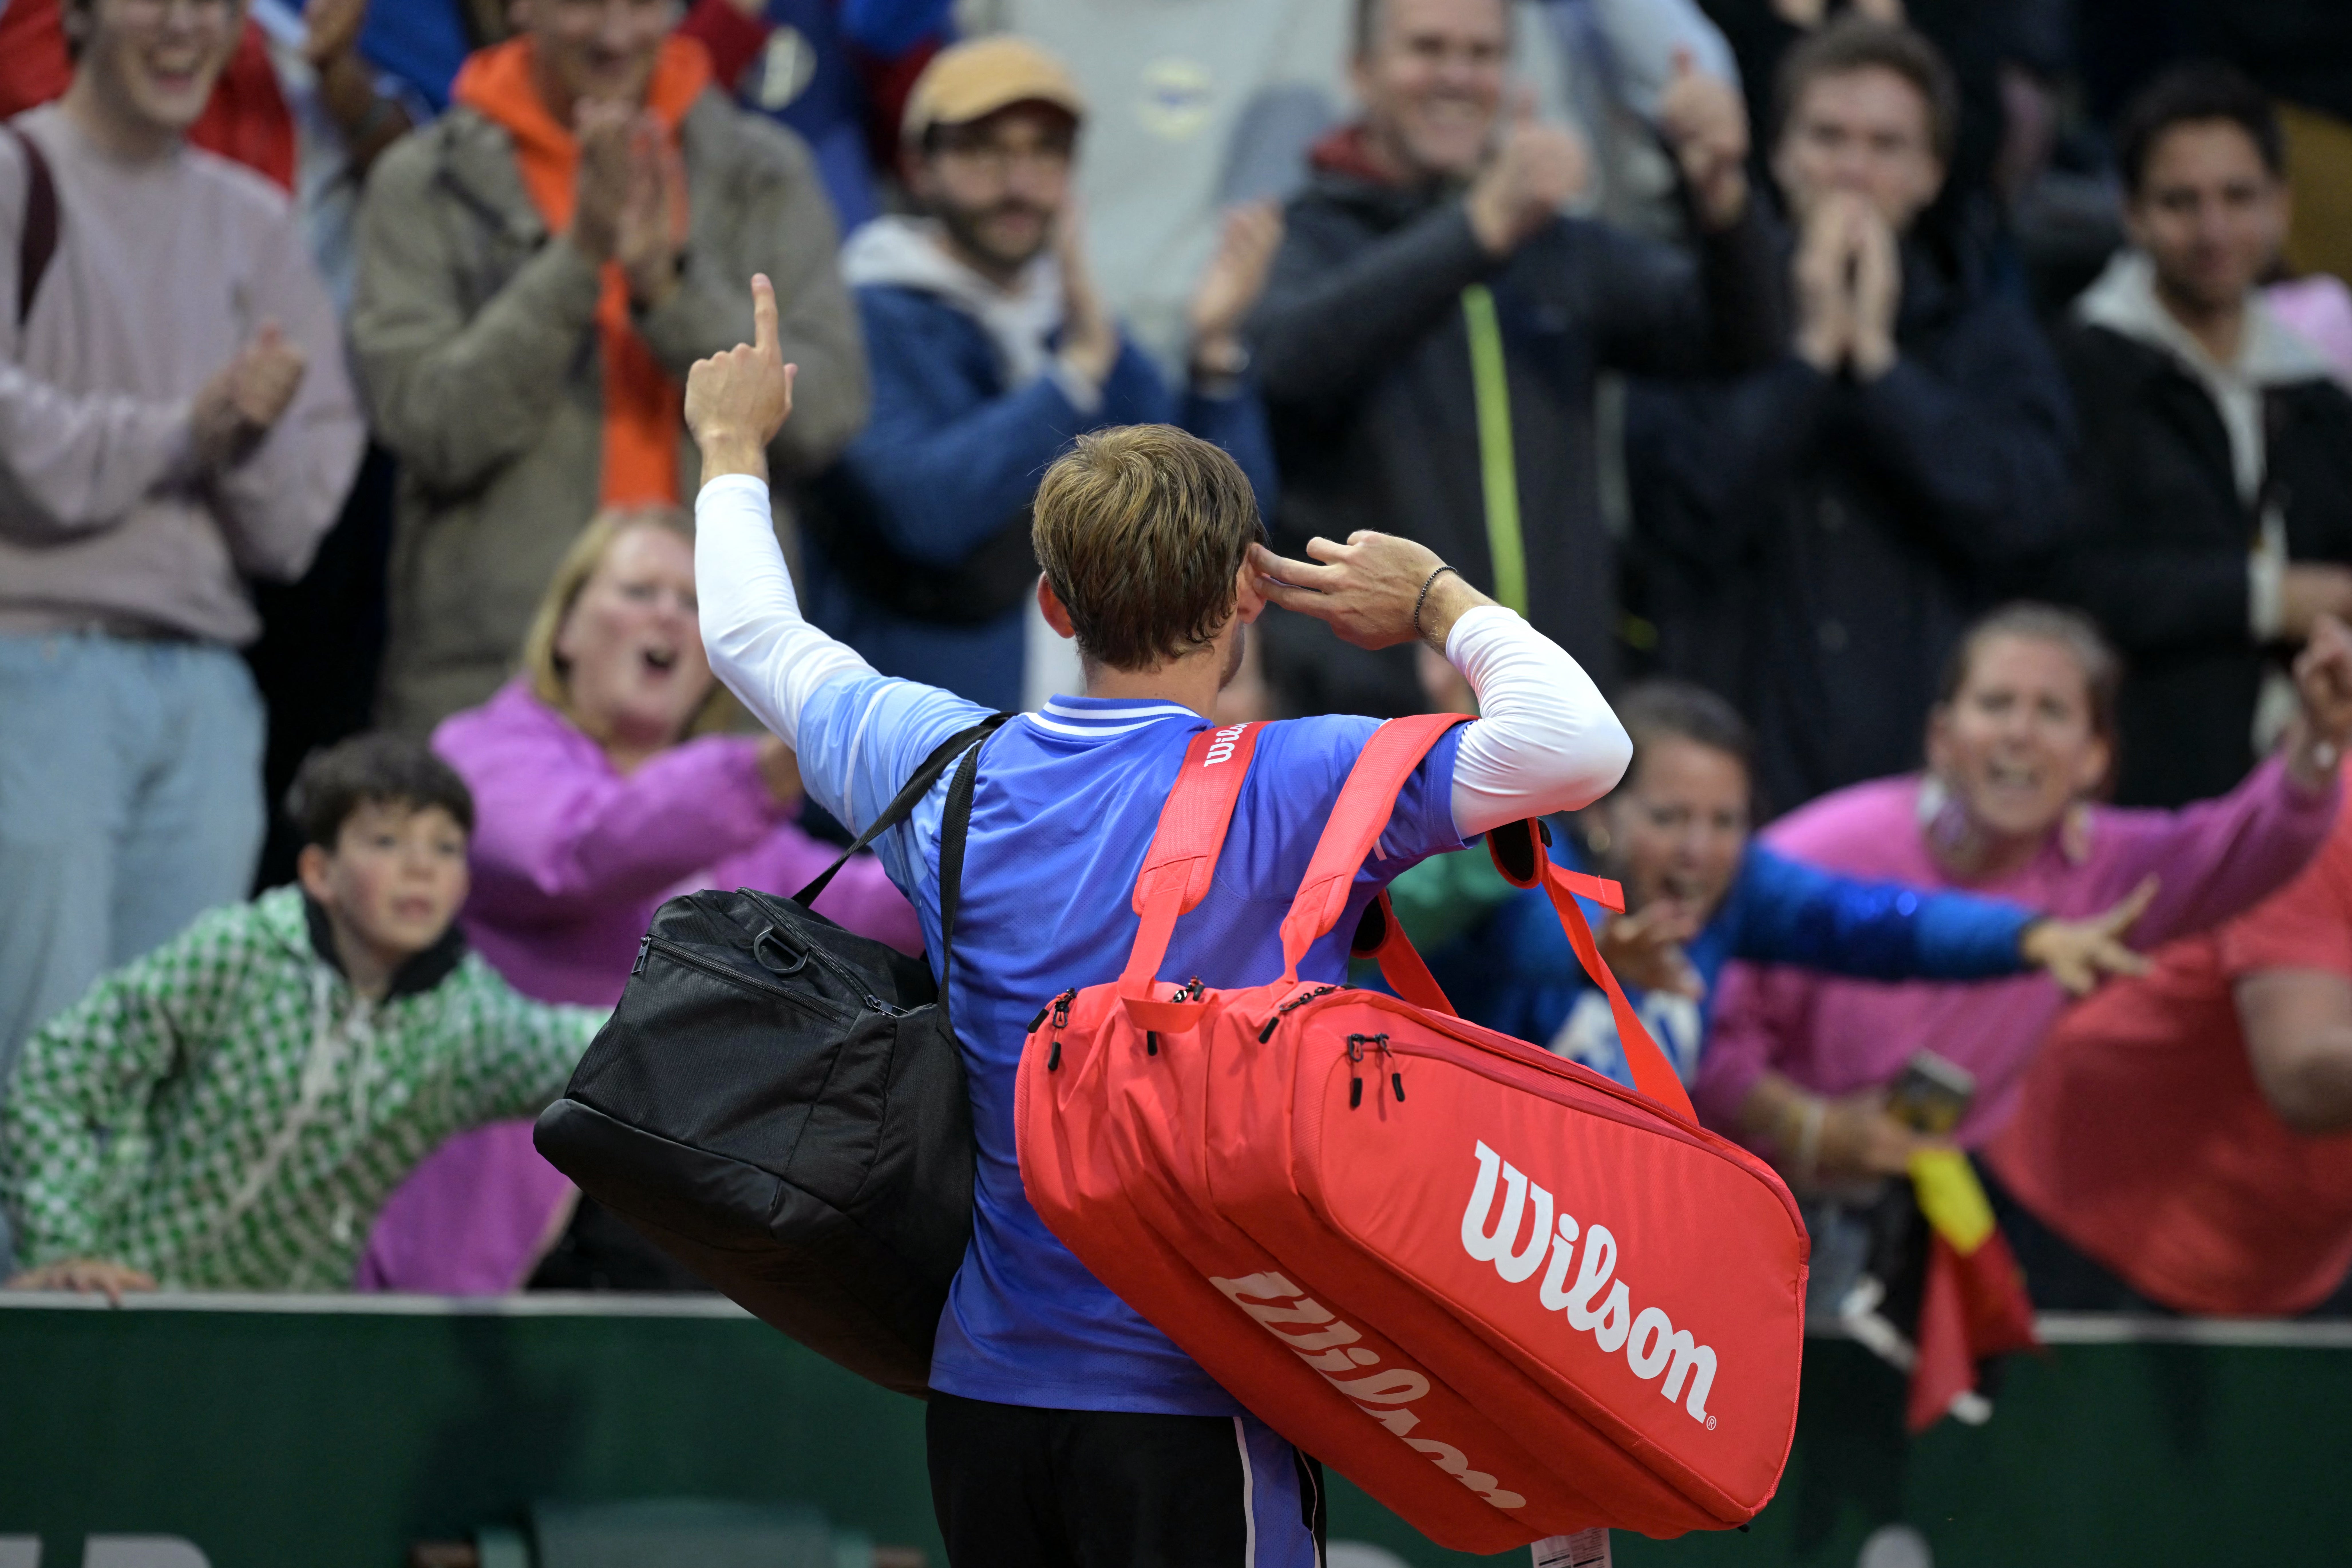 Belgium’s David Goffin reacts to the French Open spectators after victory